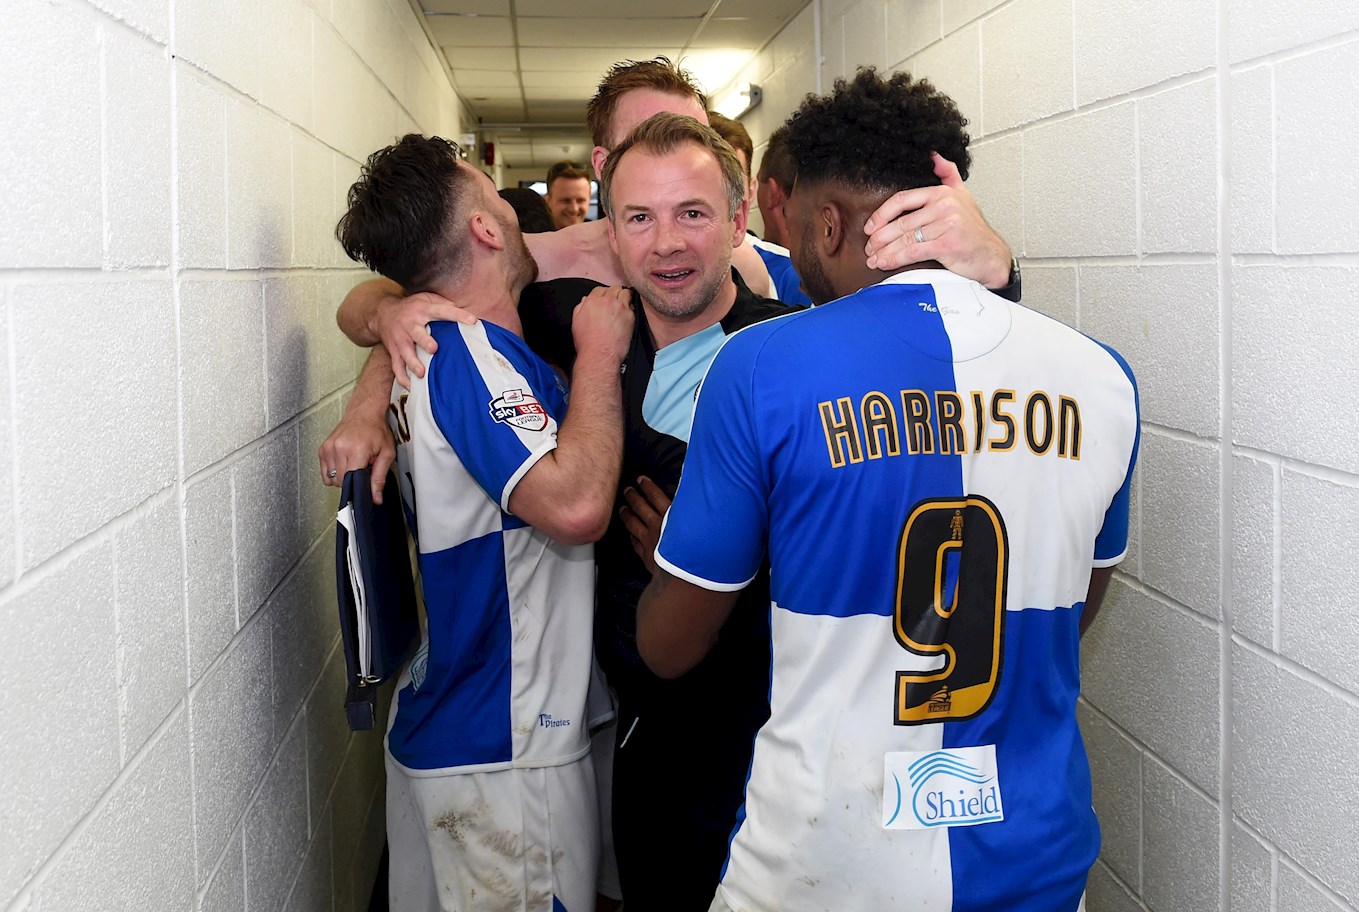 Vale striker Ellis Harrison celebrates with Marcus Stewart during their time together at Bristol Rovers.